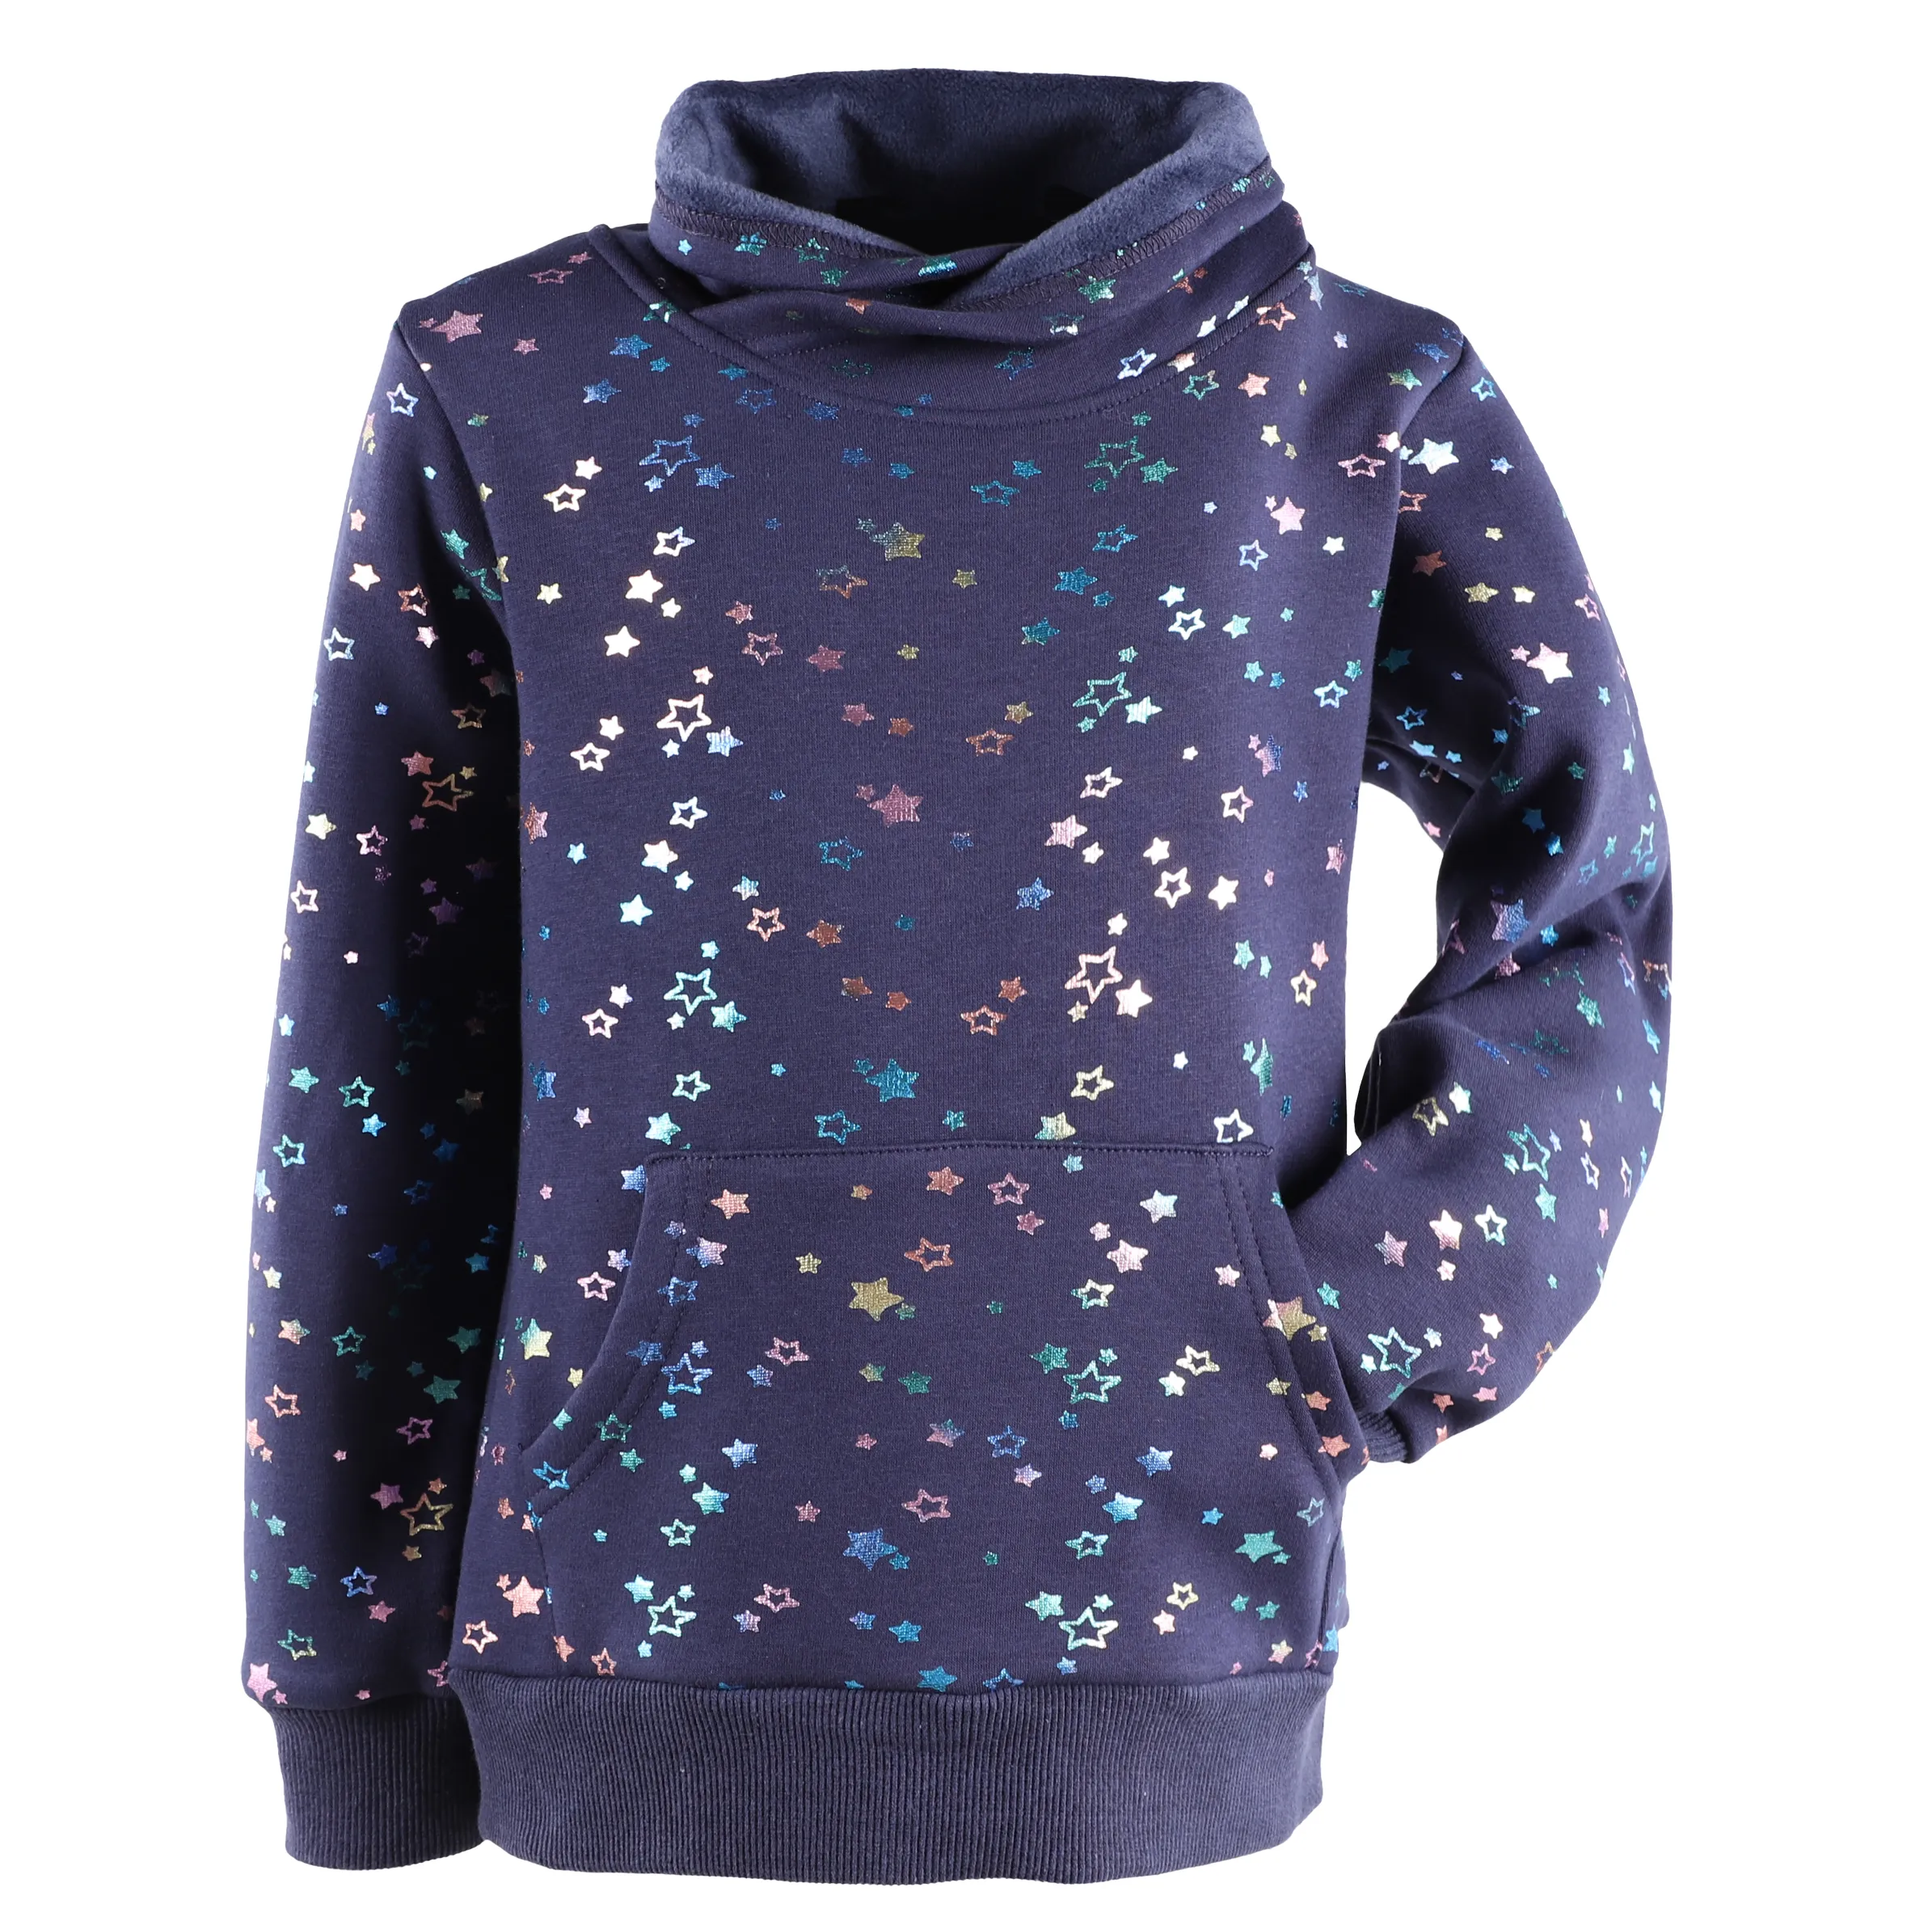 Stop + Go KM Thermo Sweater in navy mit AOP Sterne Blau 881602 NAVY 3